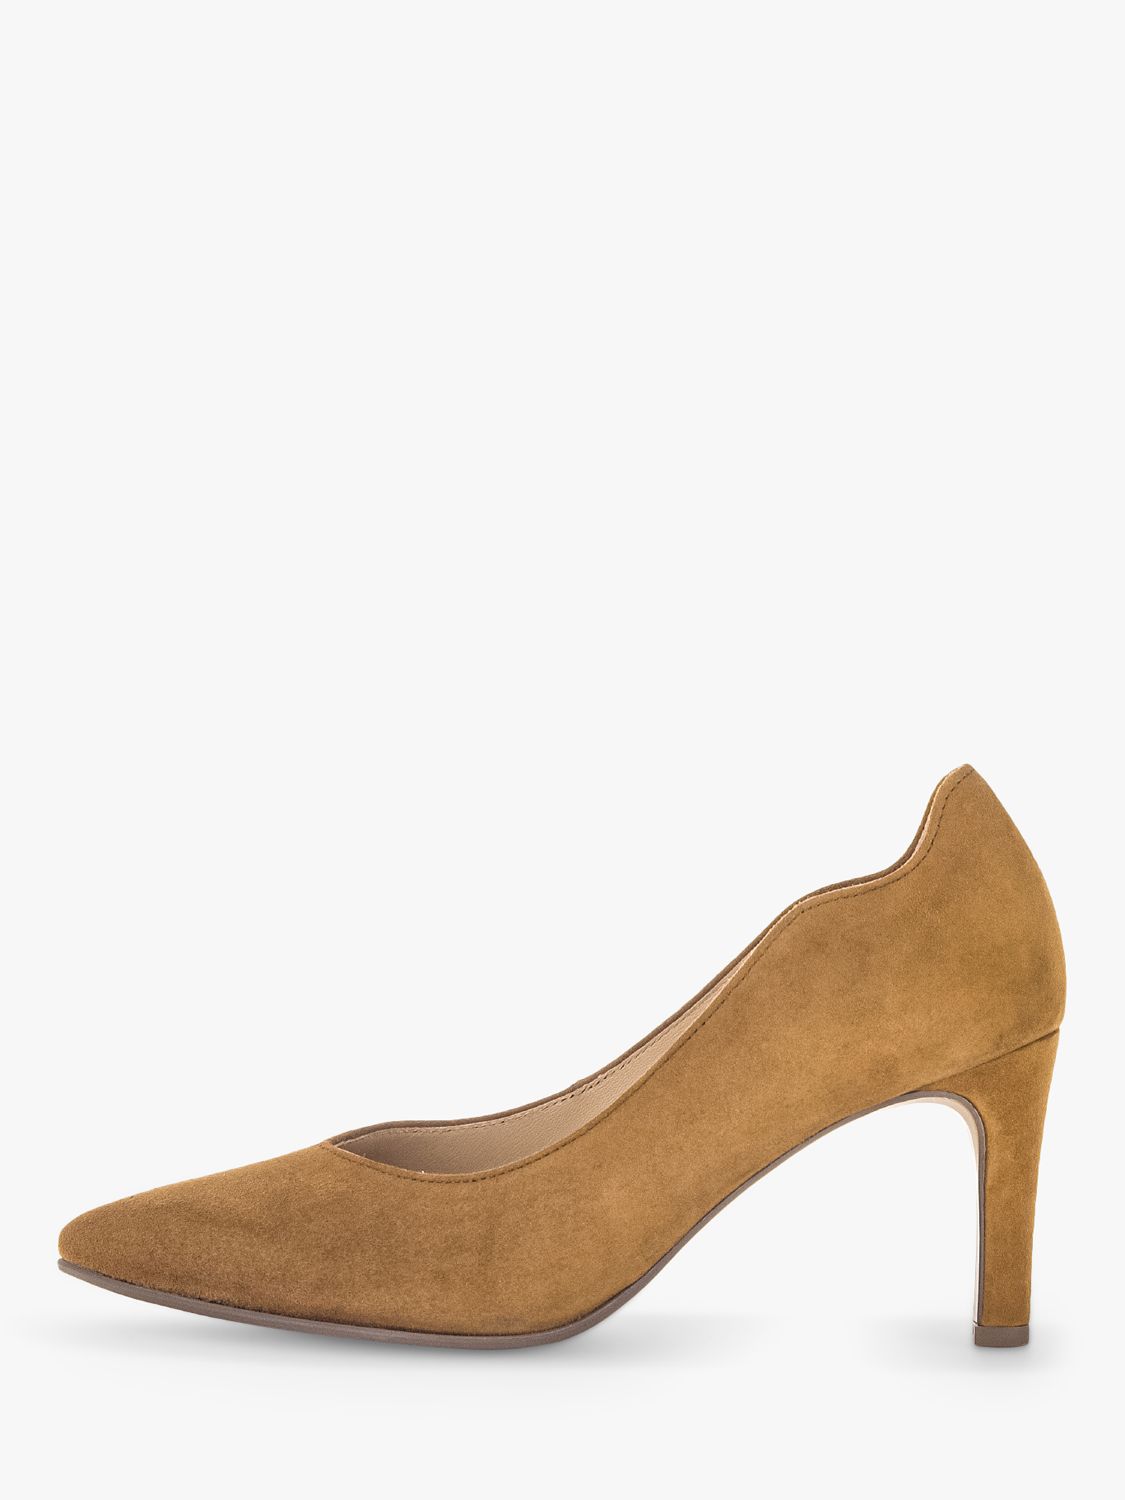 Gabor Degree Suede Court Shoes, Chino at John Lewis & Partners